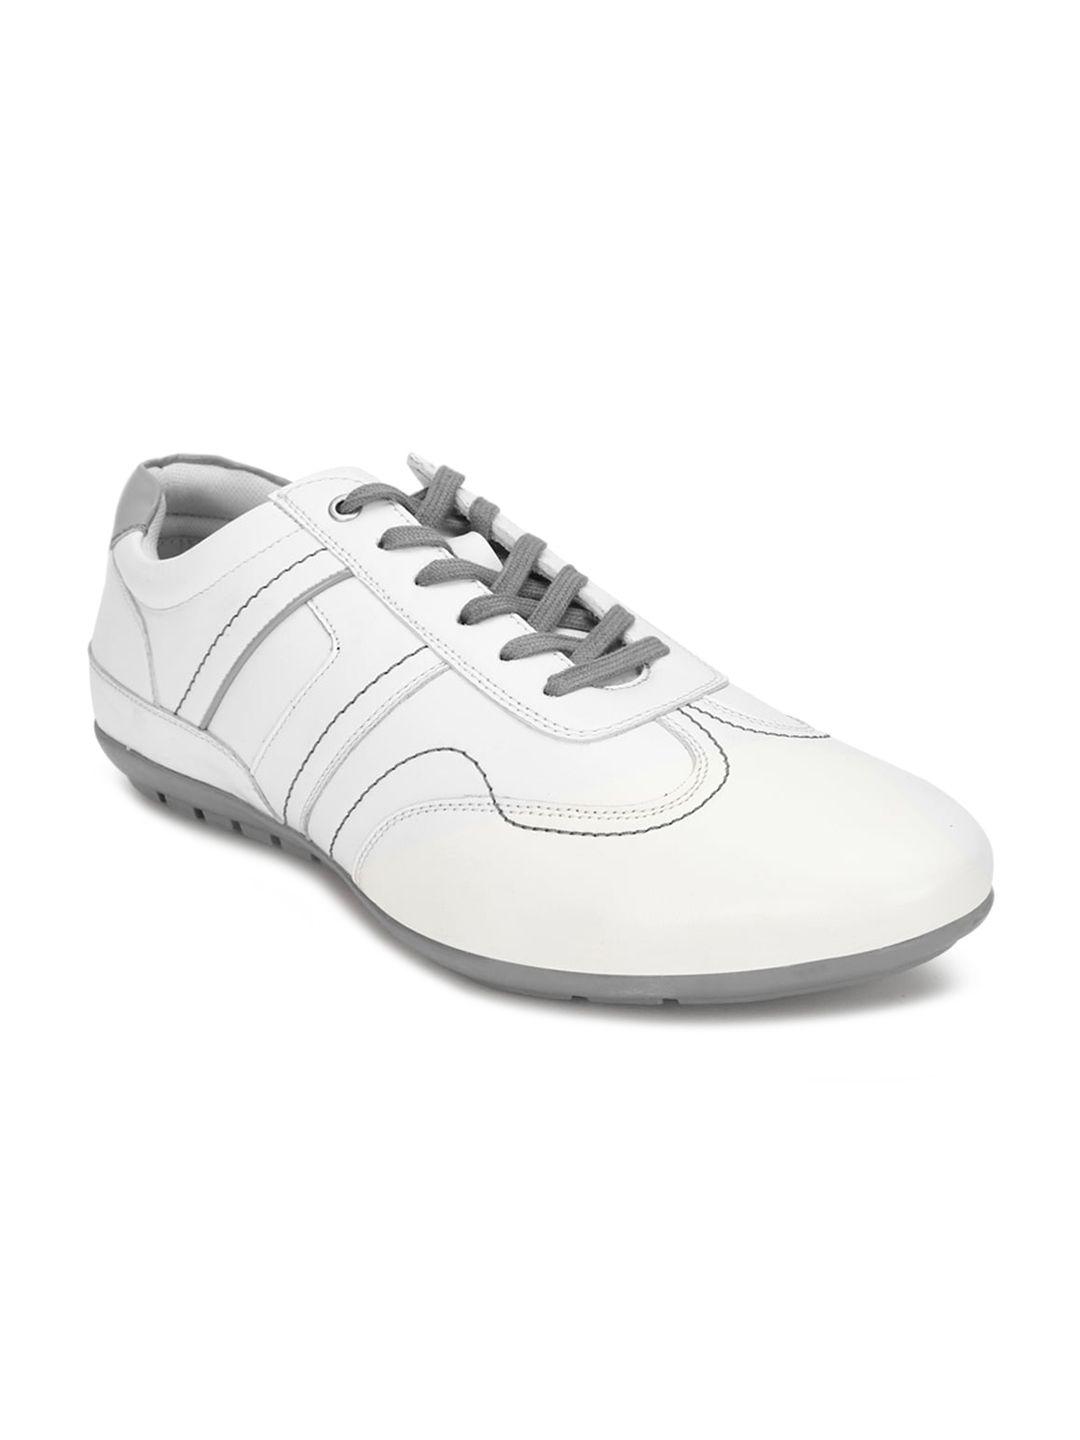 forever 21 men white & grey pu sneakers